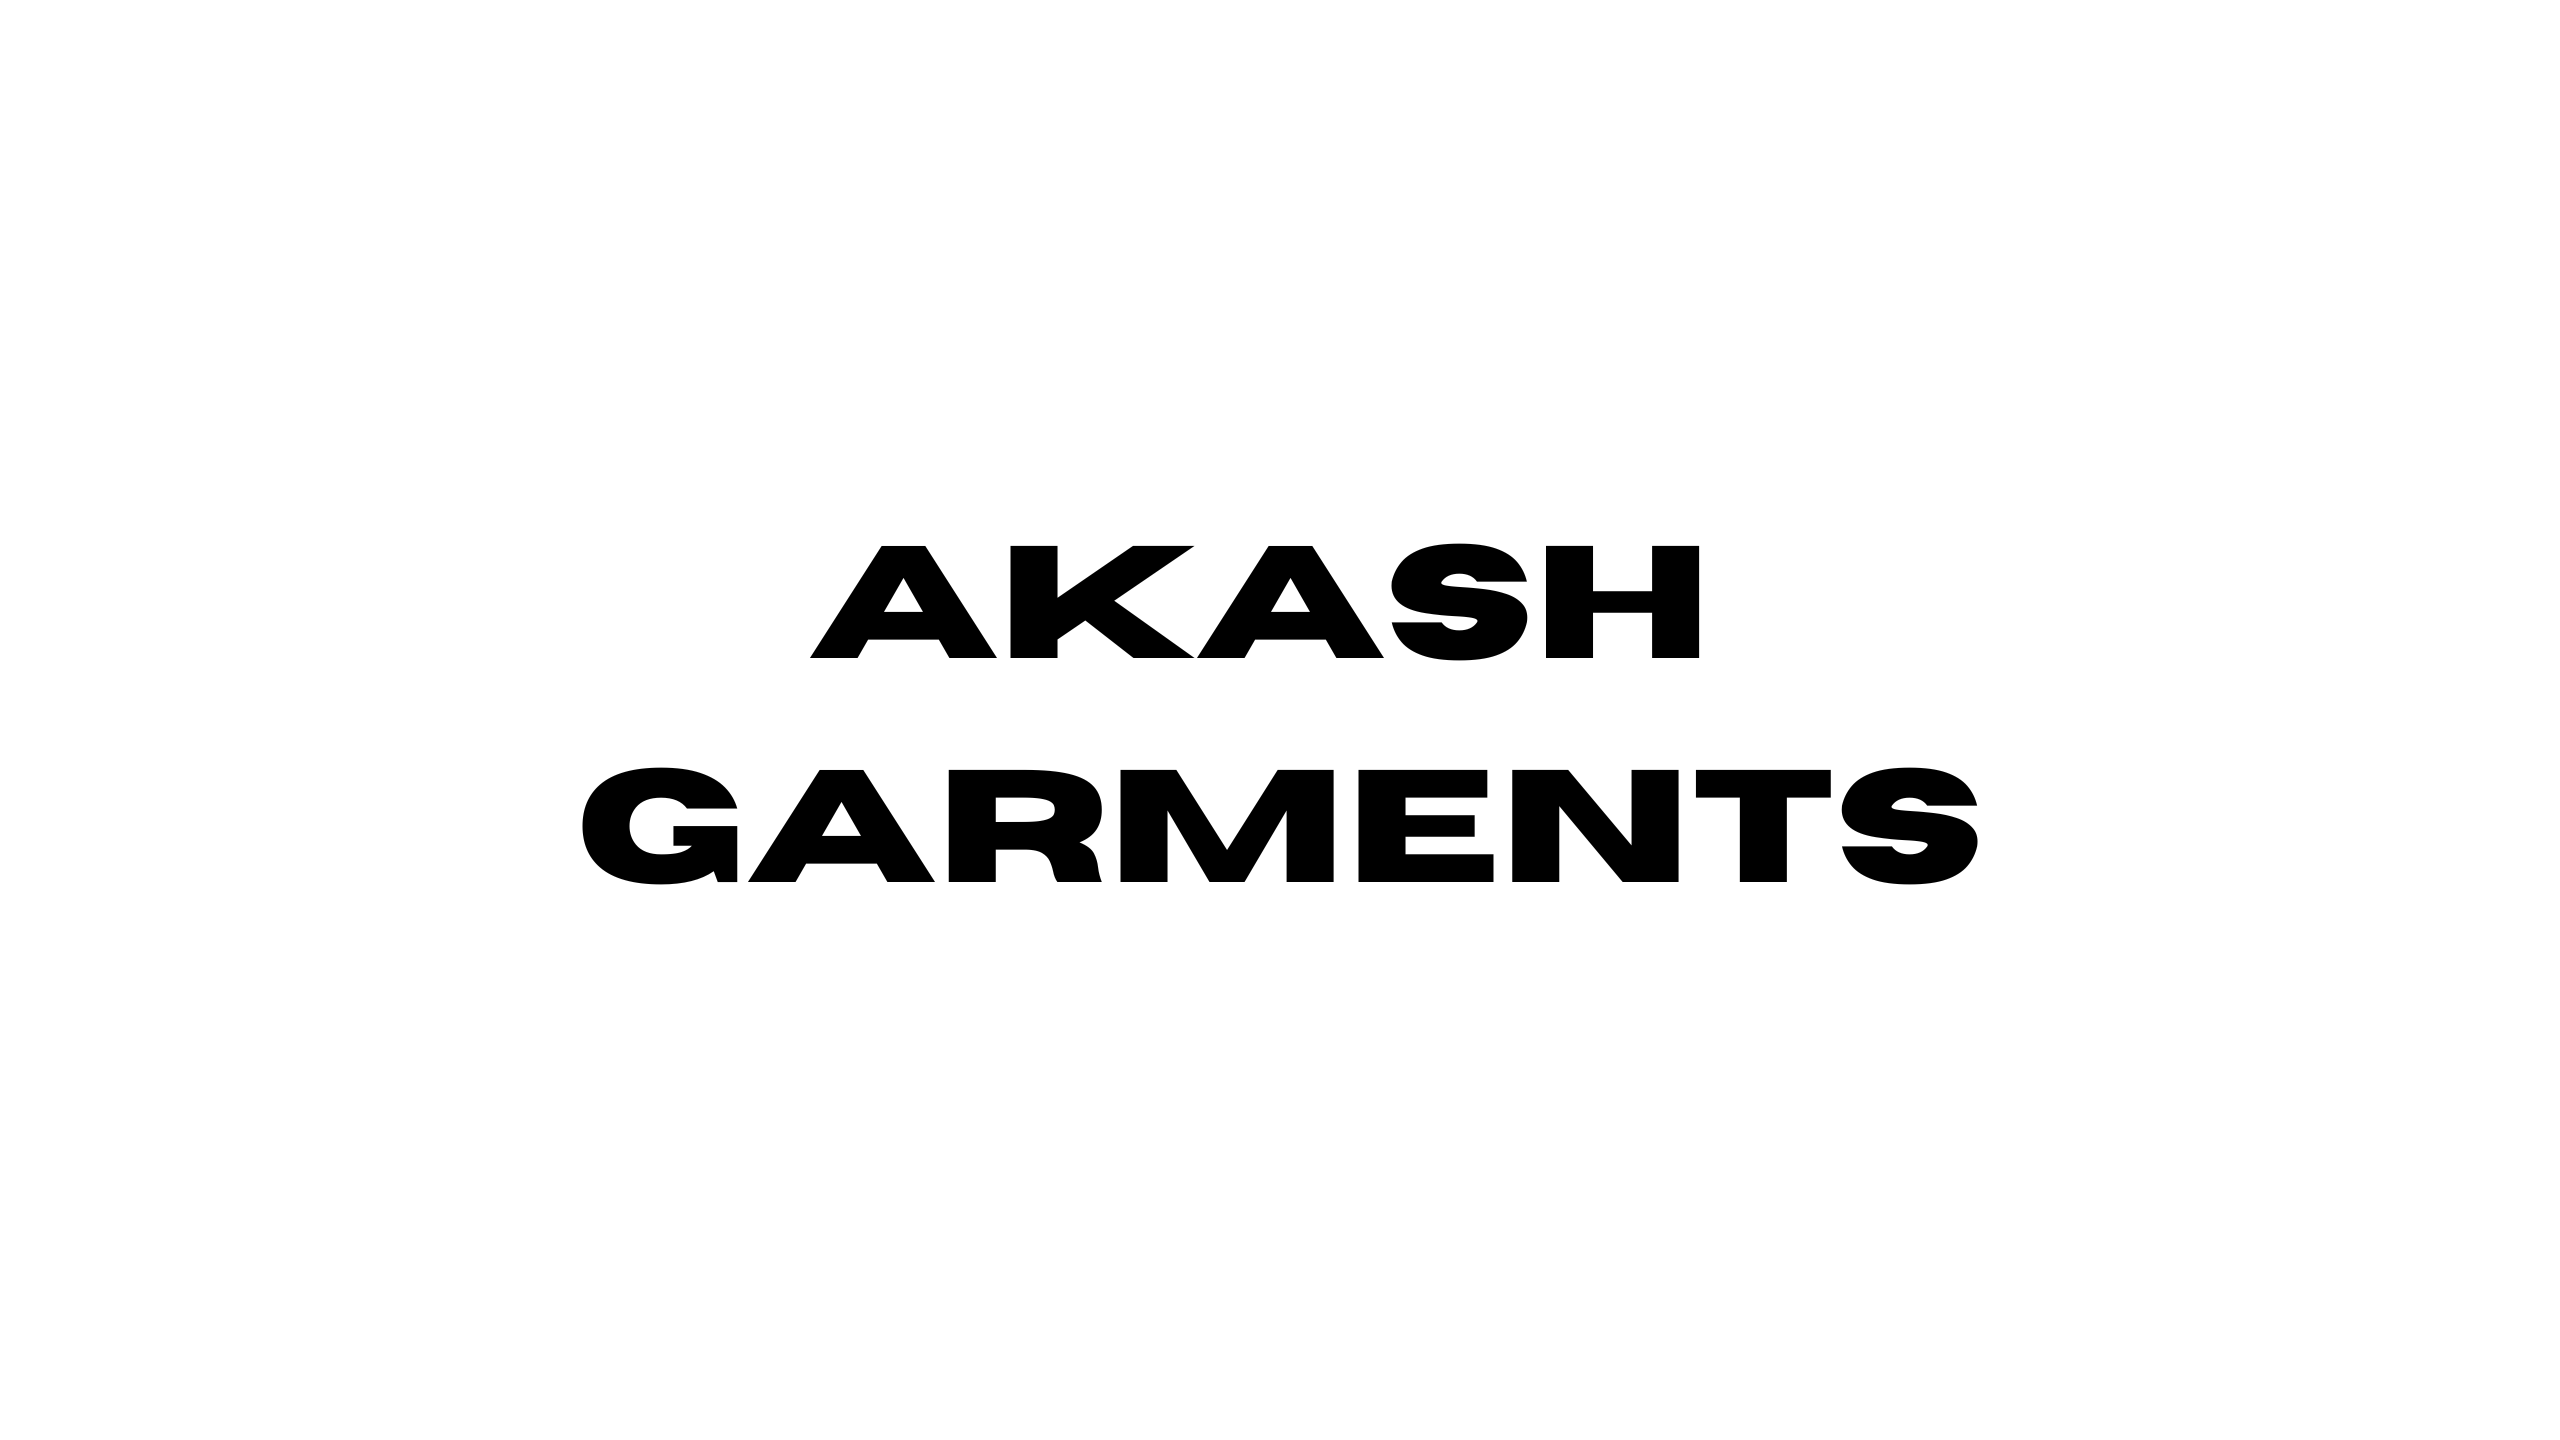 Akash Garments is a clothing and garment wholesaler – a company from which smaller brands buy, market and then sell clothes…